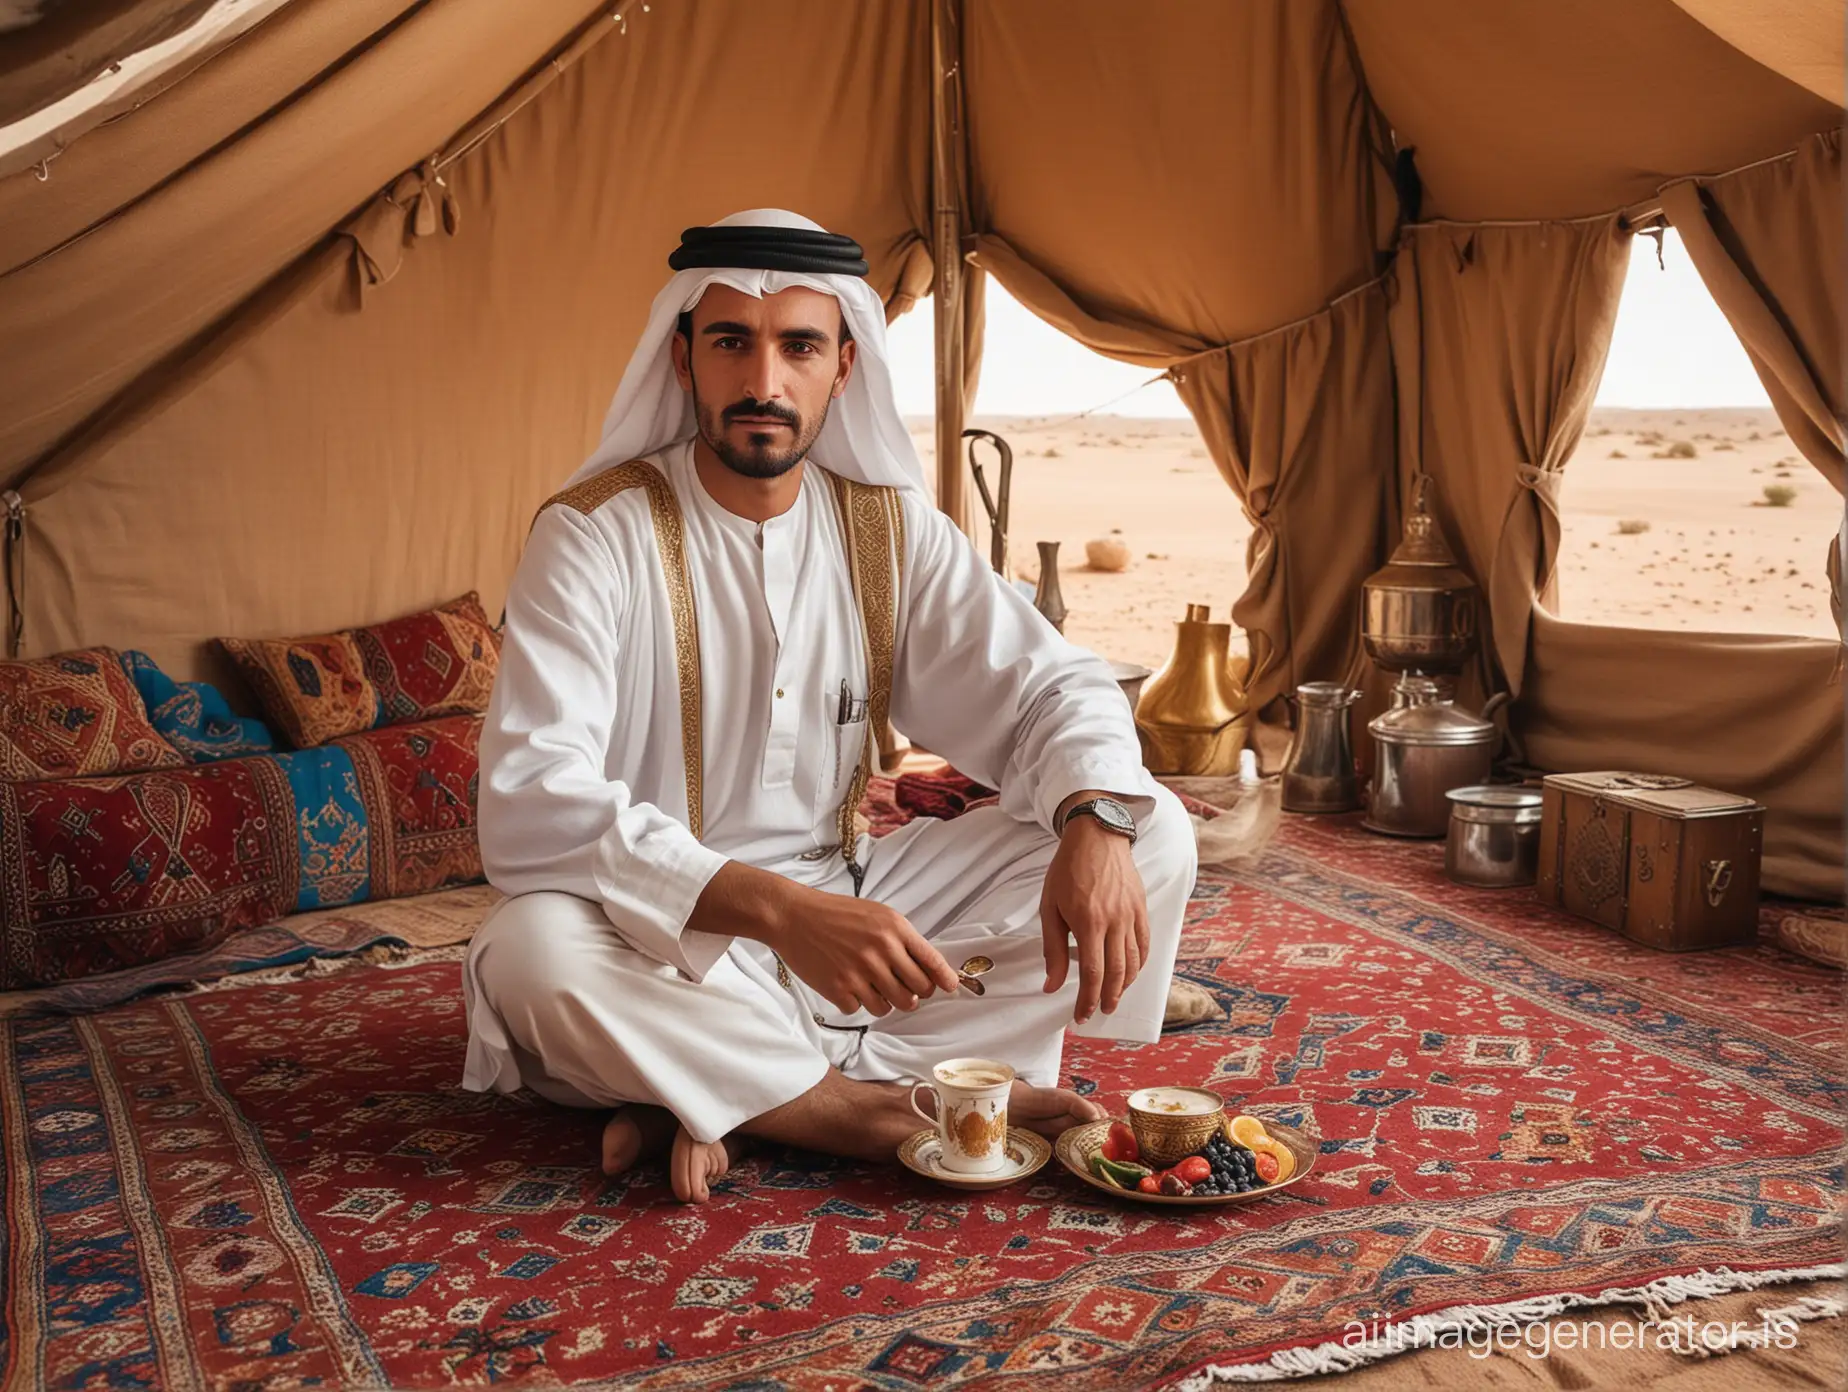 in the desert, a European man, 30, without a mustache or beard, dressed in the uniform of an Arab sheikh, sits in a luxurious tent on a beautiful carpet, holding a cup of hot coffee in his hand and looking into the lens. Various fruits and gourmet food are laid out on the carpet. Outside the tent, a dusty off-road car is parked next to the camel column, photorealism